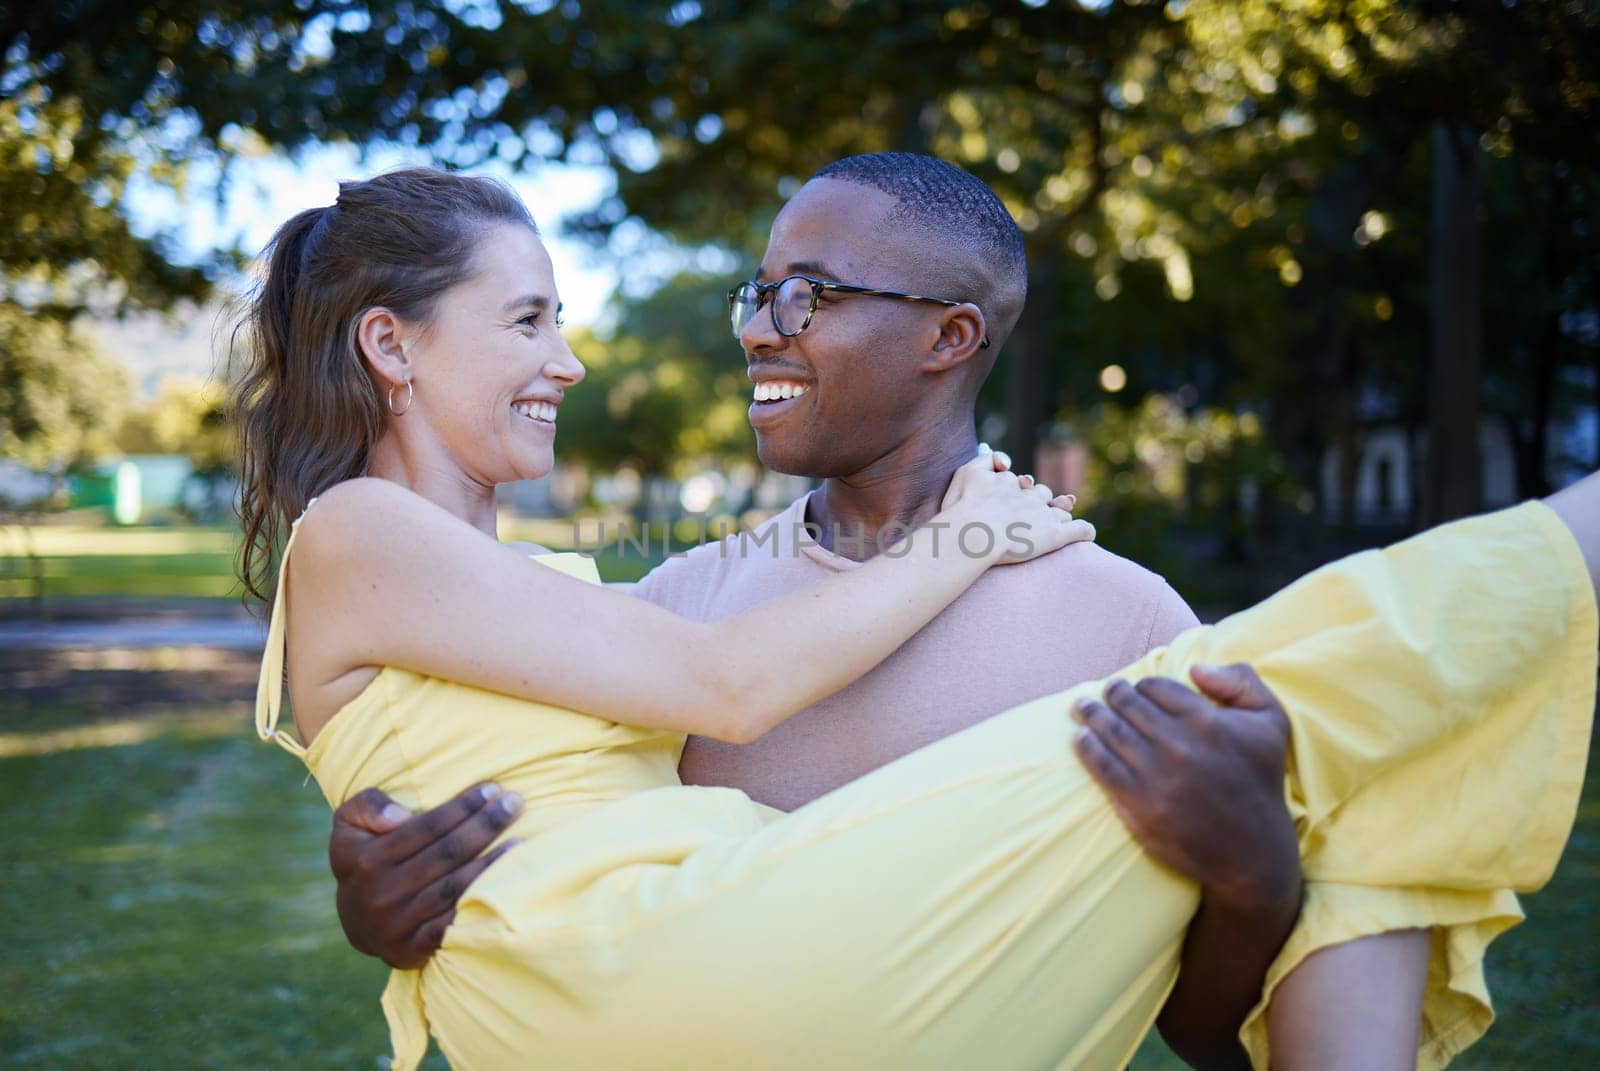 Love, park and carrying with an interracial couple bonding outdoor together on a romantic date in nature. Summer, romance and diversity with a man and woman dating outside in a green garden.